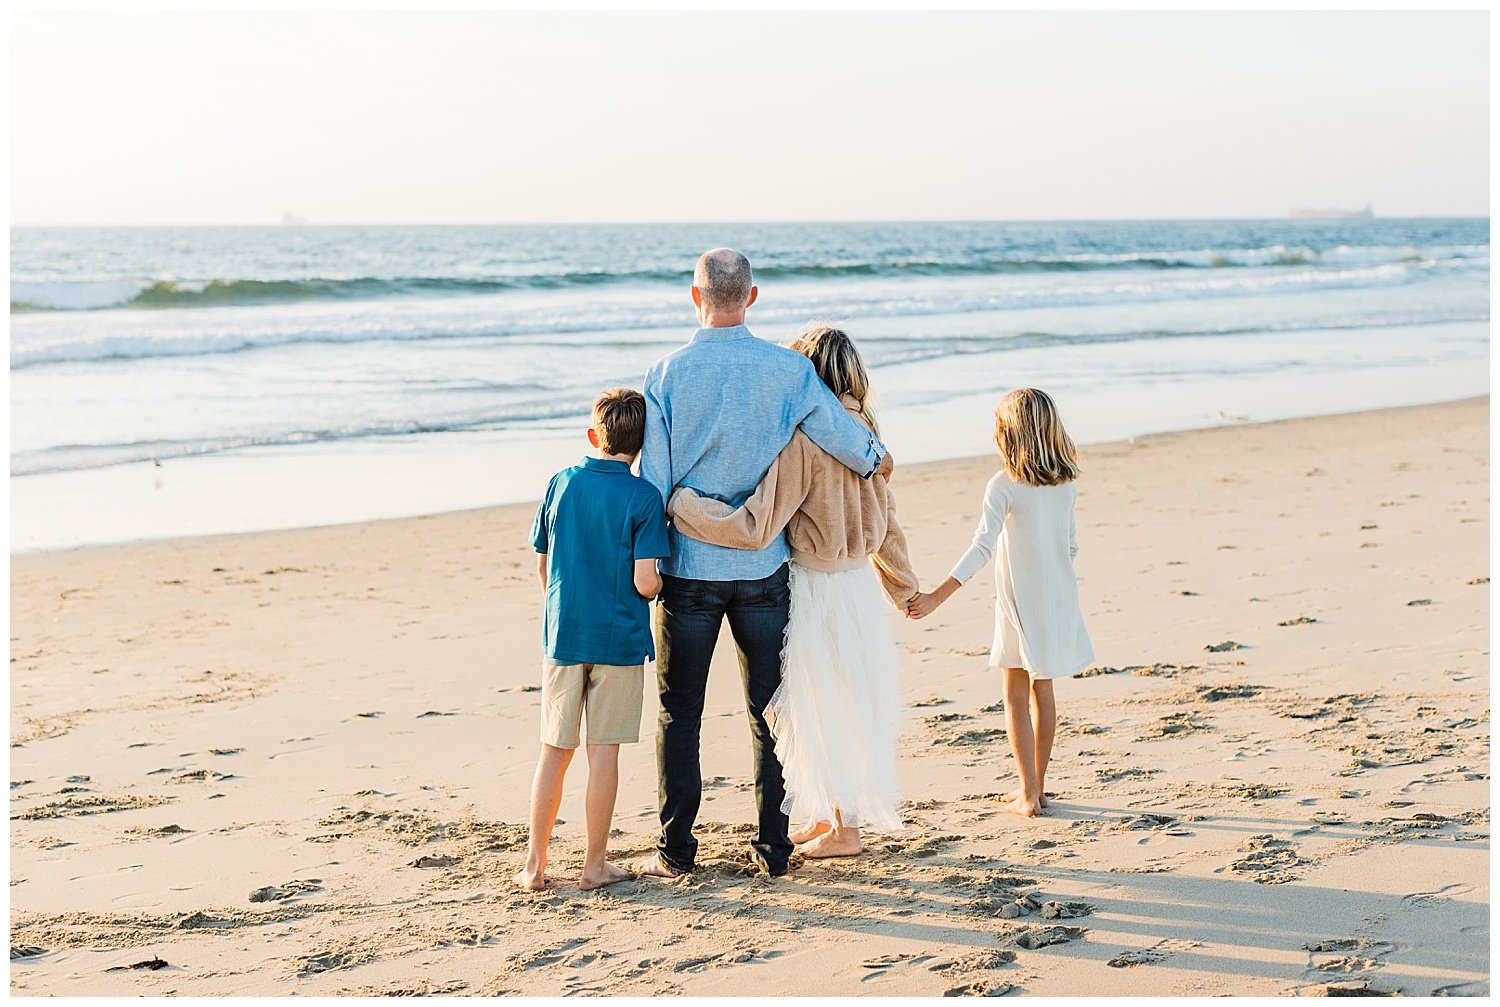 Los Angeles family beach photography session